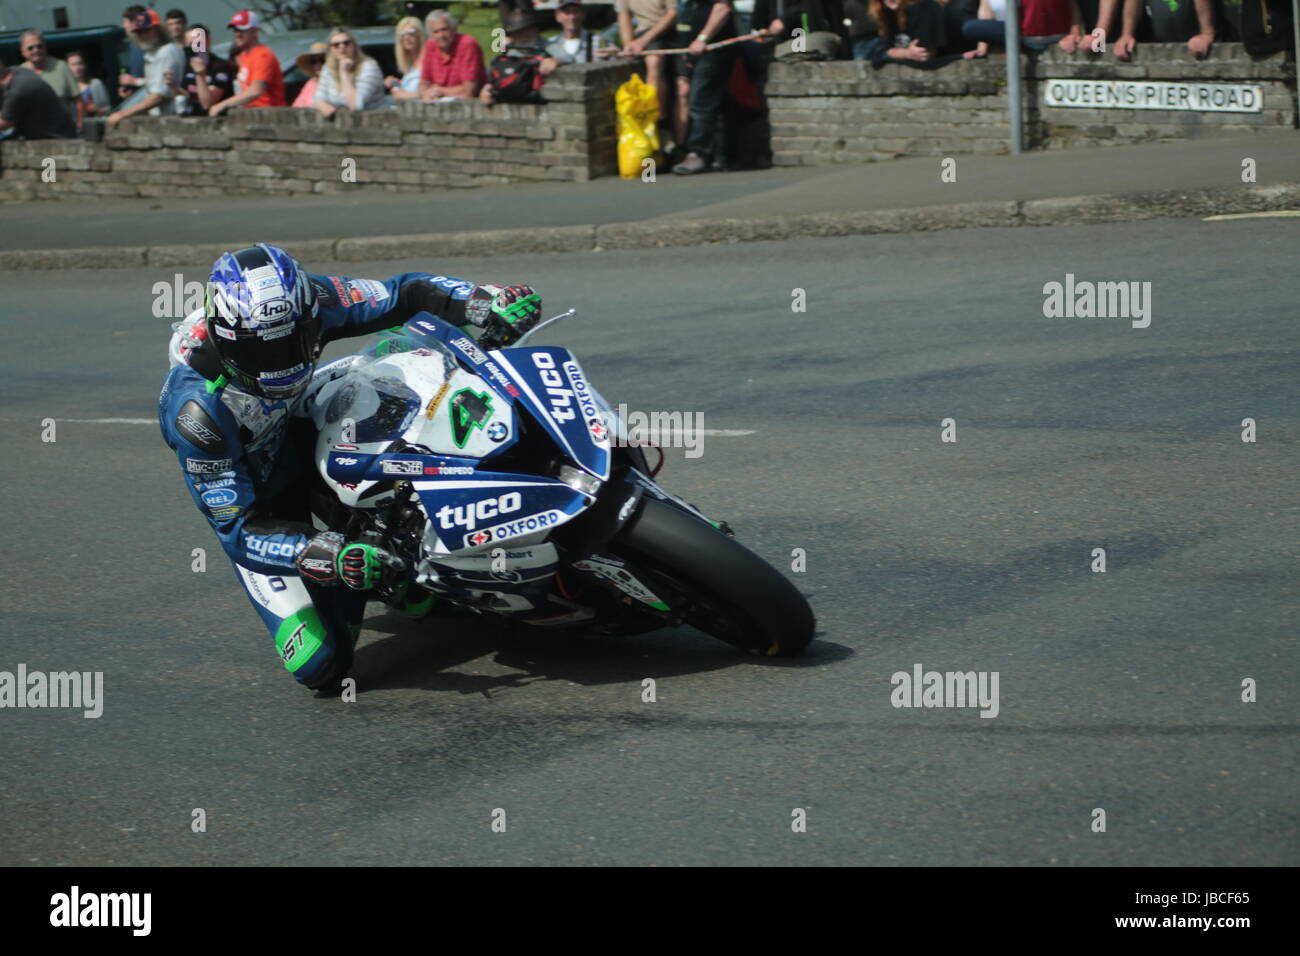 Isle Of Man, British Isles (UK). 9th June, 2017.  Fan Favorite, number 4, Ian Hutchinson on his Tyco BMW at Cruickshank's Corner, Ramsey, Isle of Man. 'Hutchy' was airlifted to hoispital after he suffered a fractured femur when he crashed his motorcycle near the 27th milestone on the Mountain Road on lap two of the race. The race was red flagged and restarted over four laps at 5.15pm. Pokerstars Senior TT Race. (Detailed competitor information: https://www.iomtt.com/TT-Database.aspx) Credit: Louisa Jane Bawden/Alamy Live News. Stock Photo